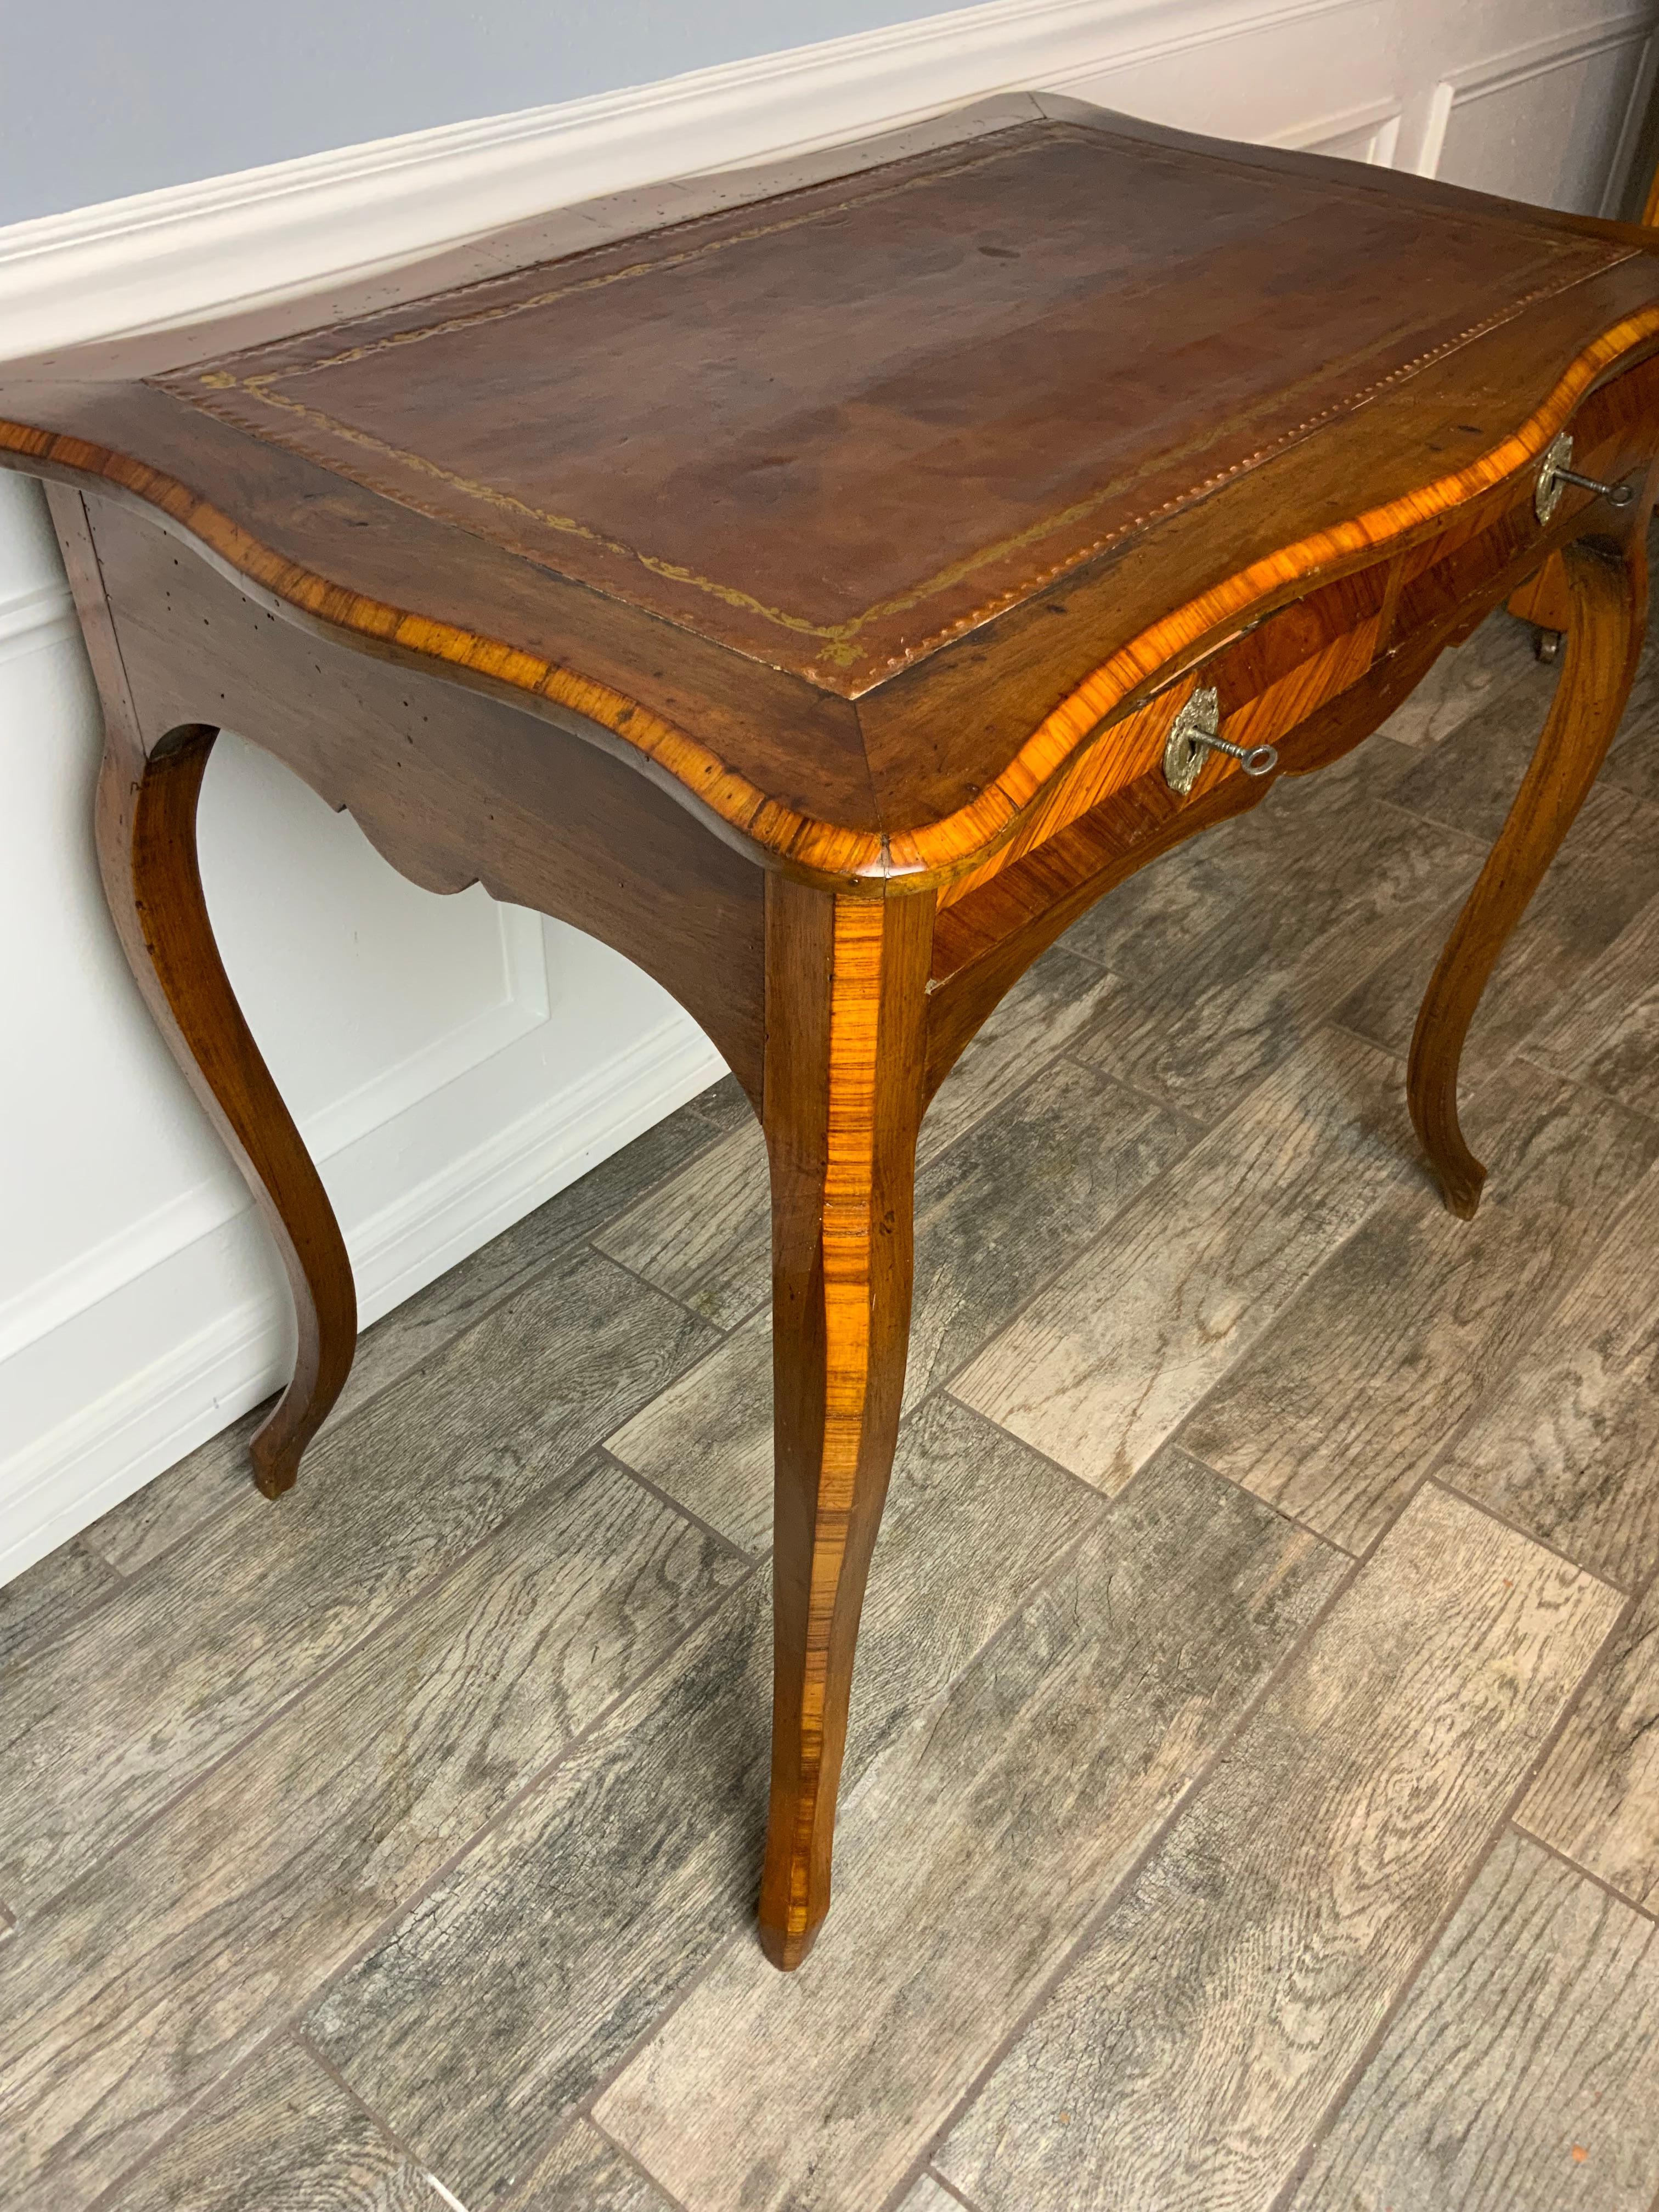 A very nice 18th century Walnut and Tulipwood leather top French writing desk. This is a beautiful petite size piece made of French Walnut with Tulipwood cross banding on the top edge, drawer faces, and down the fronts of the legs. Excellent color